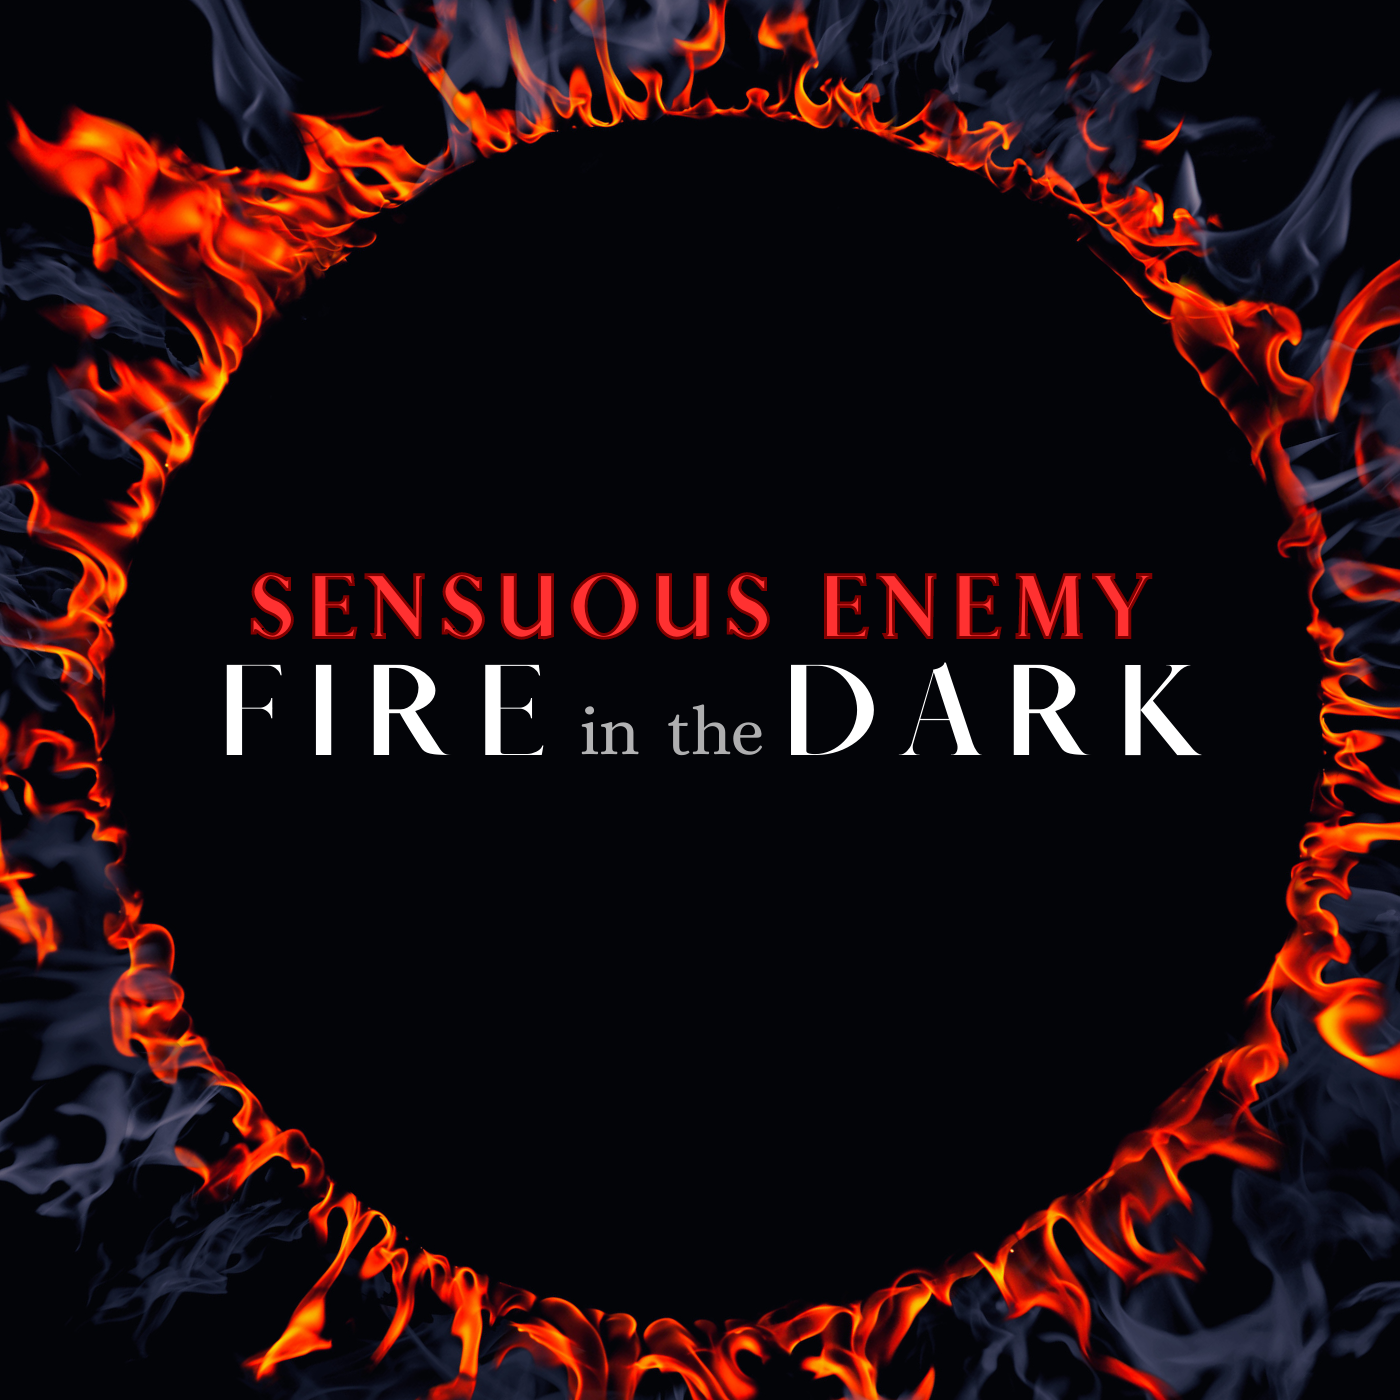 NEW Album by Sensuous Enemy titled "Fire in the Dark"